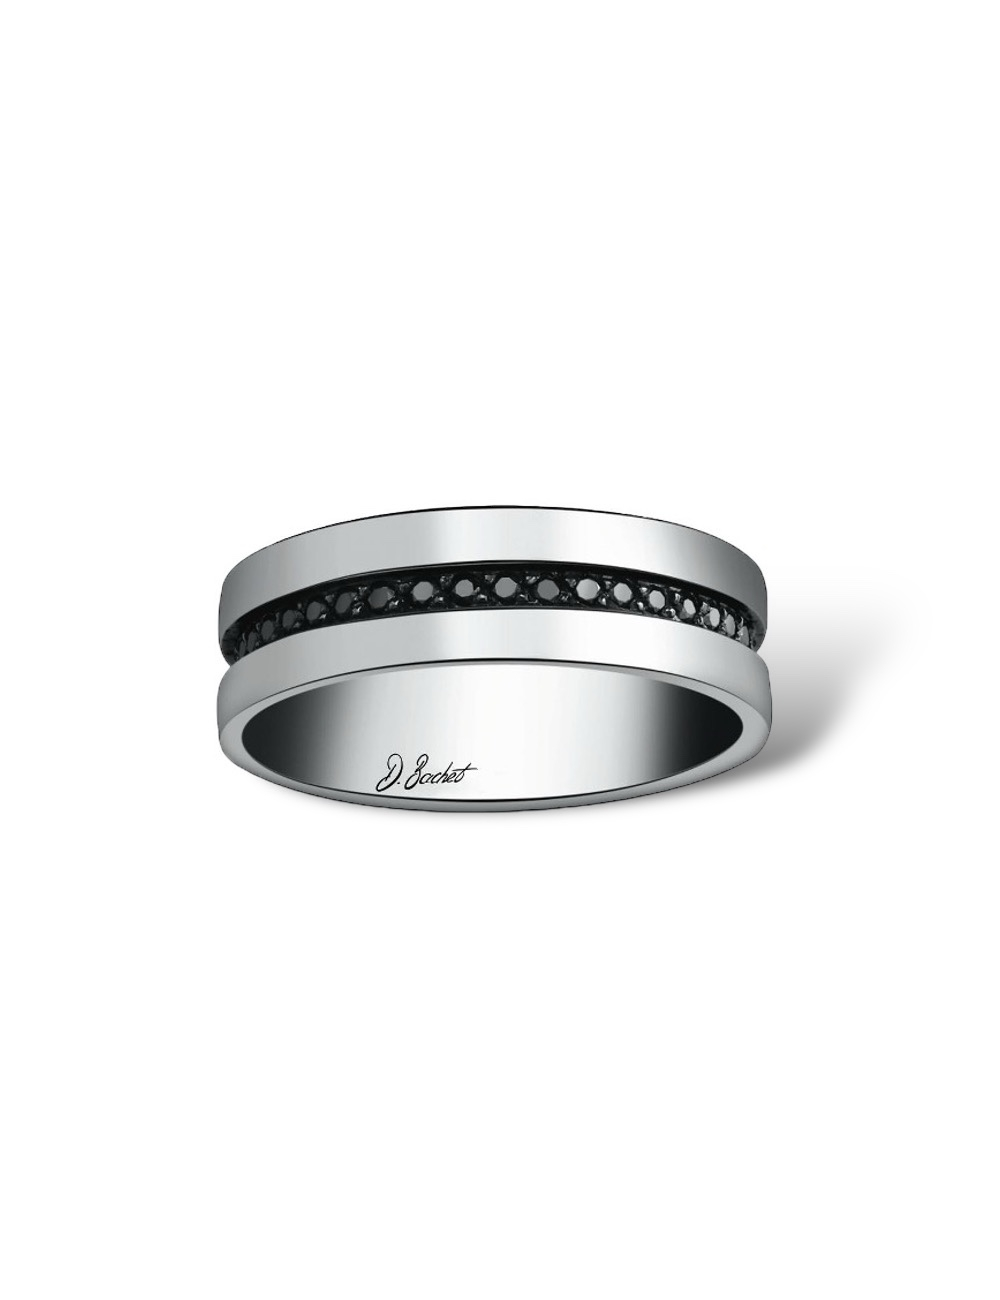 Contemporary men's wedding band in black diamonds, platinum/gold, various widths, also in white diamonds, French craftsmanship.